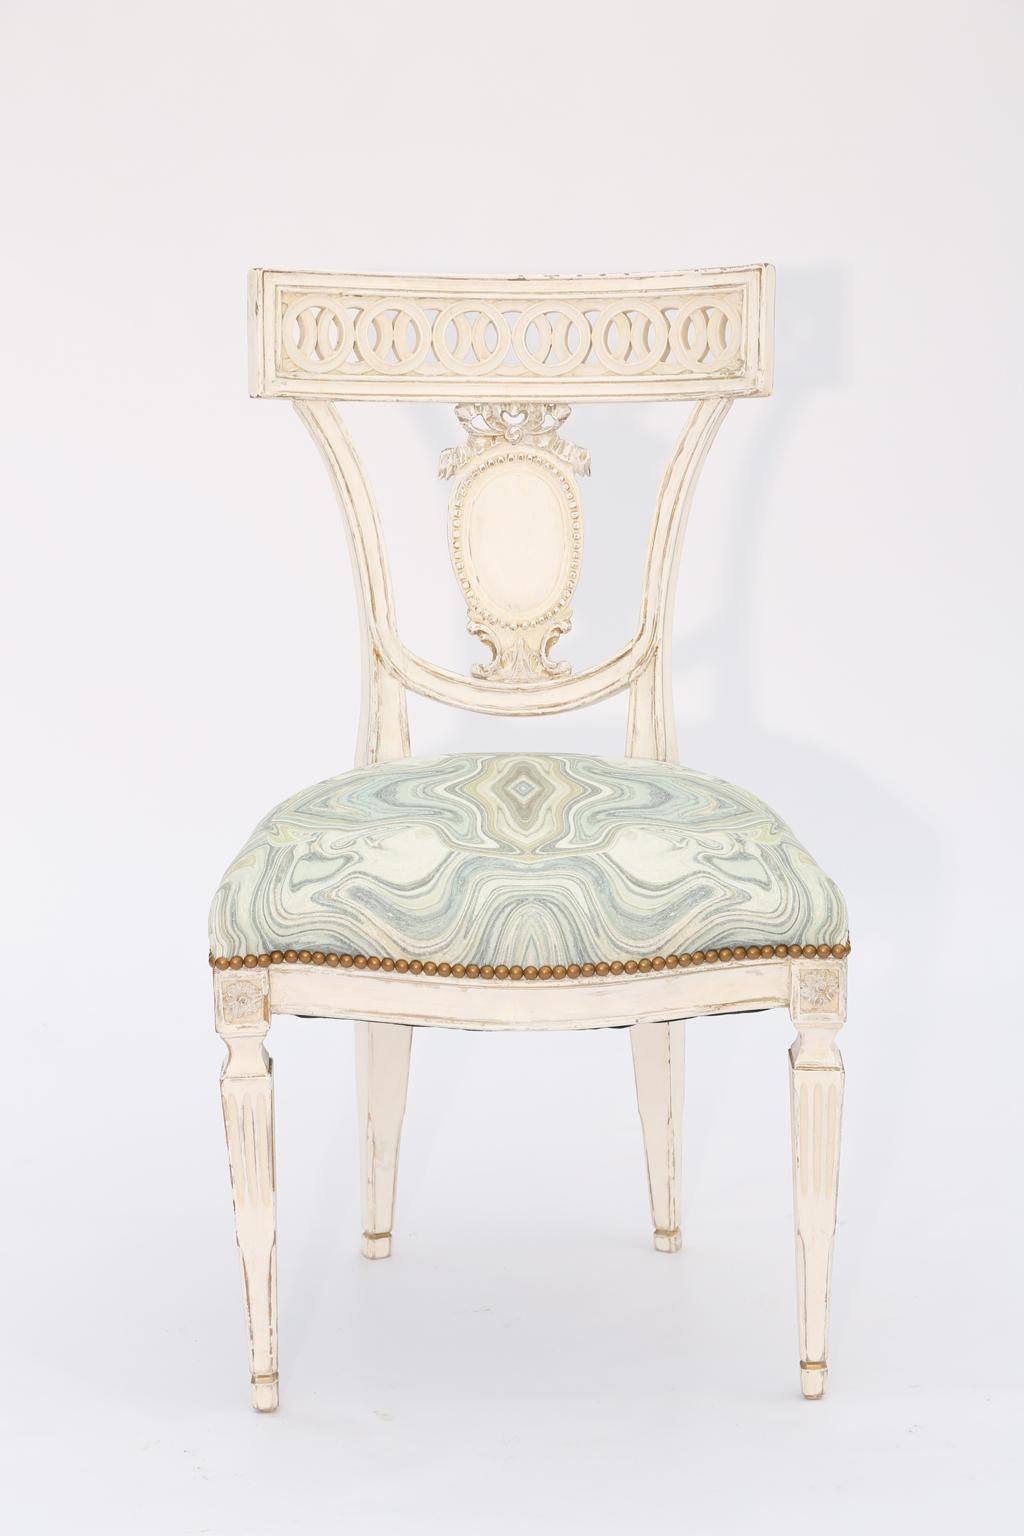 Wood Single Painted Italian Classical Style Side Chair